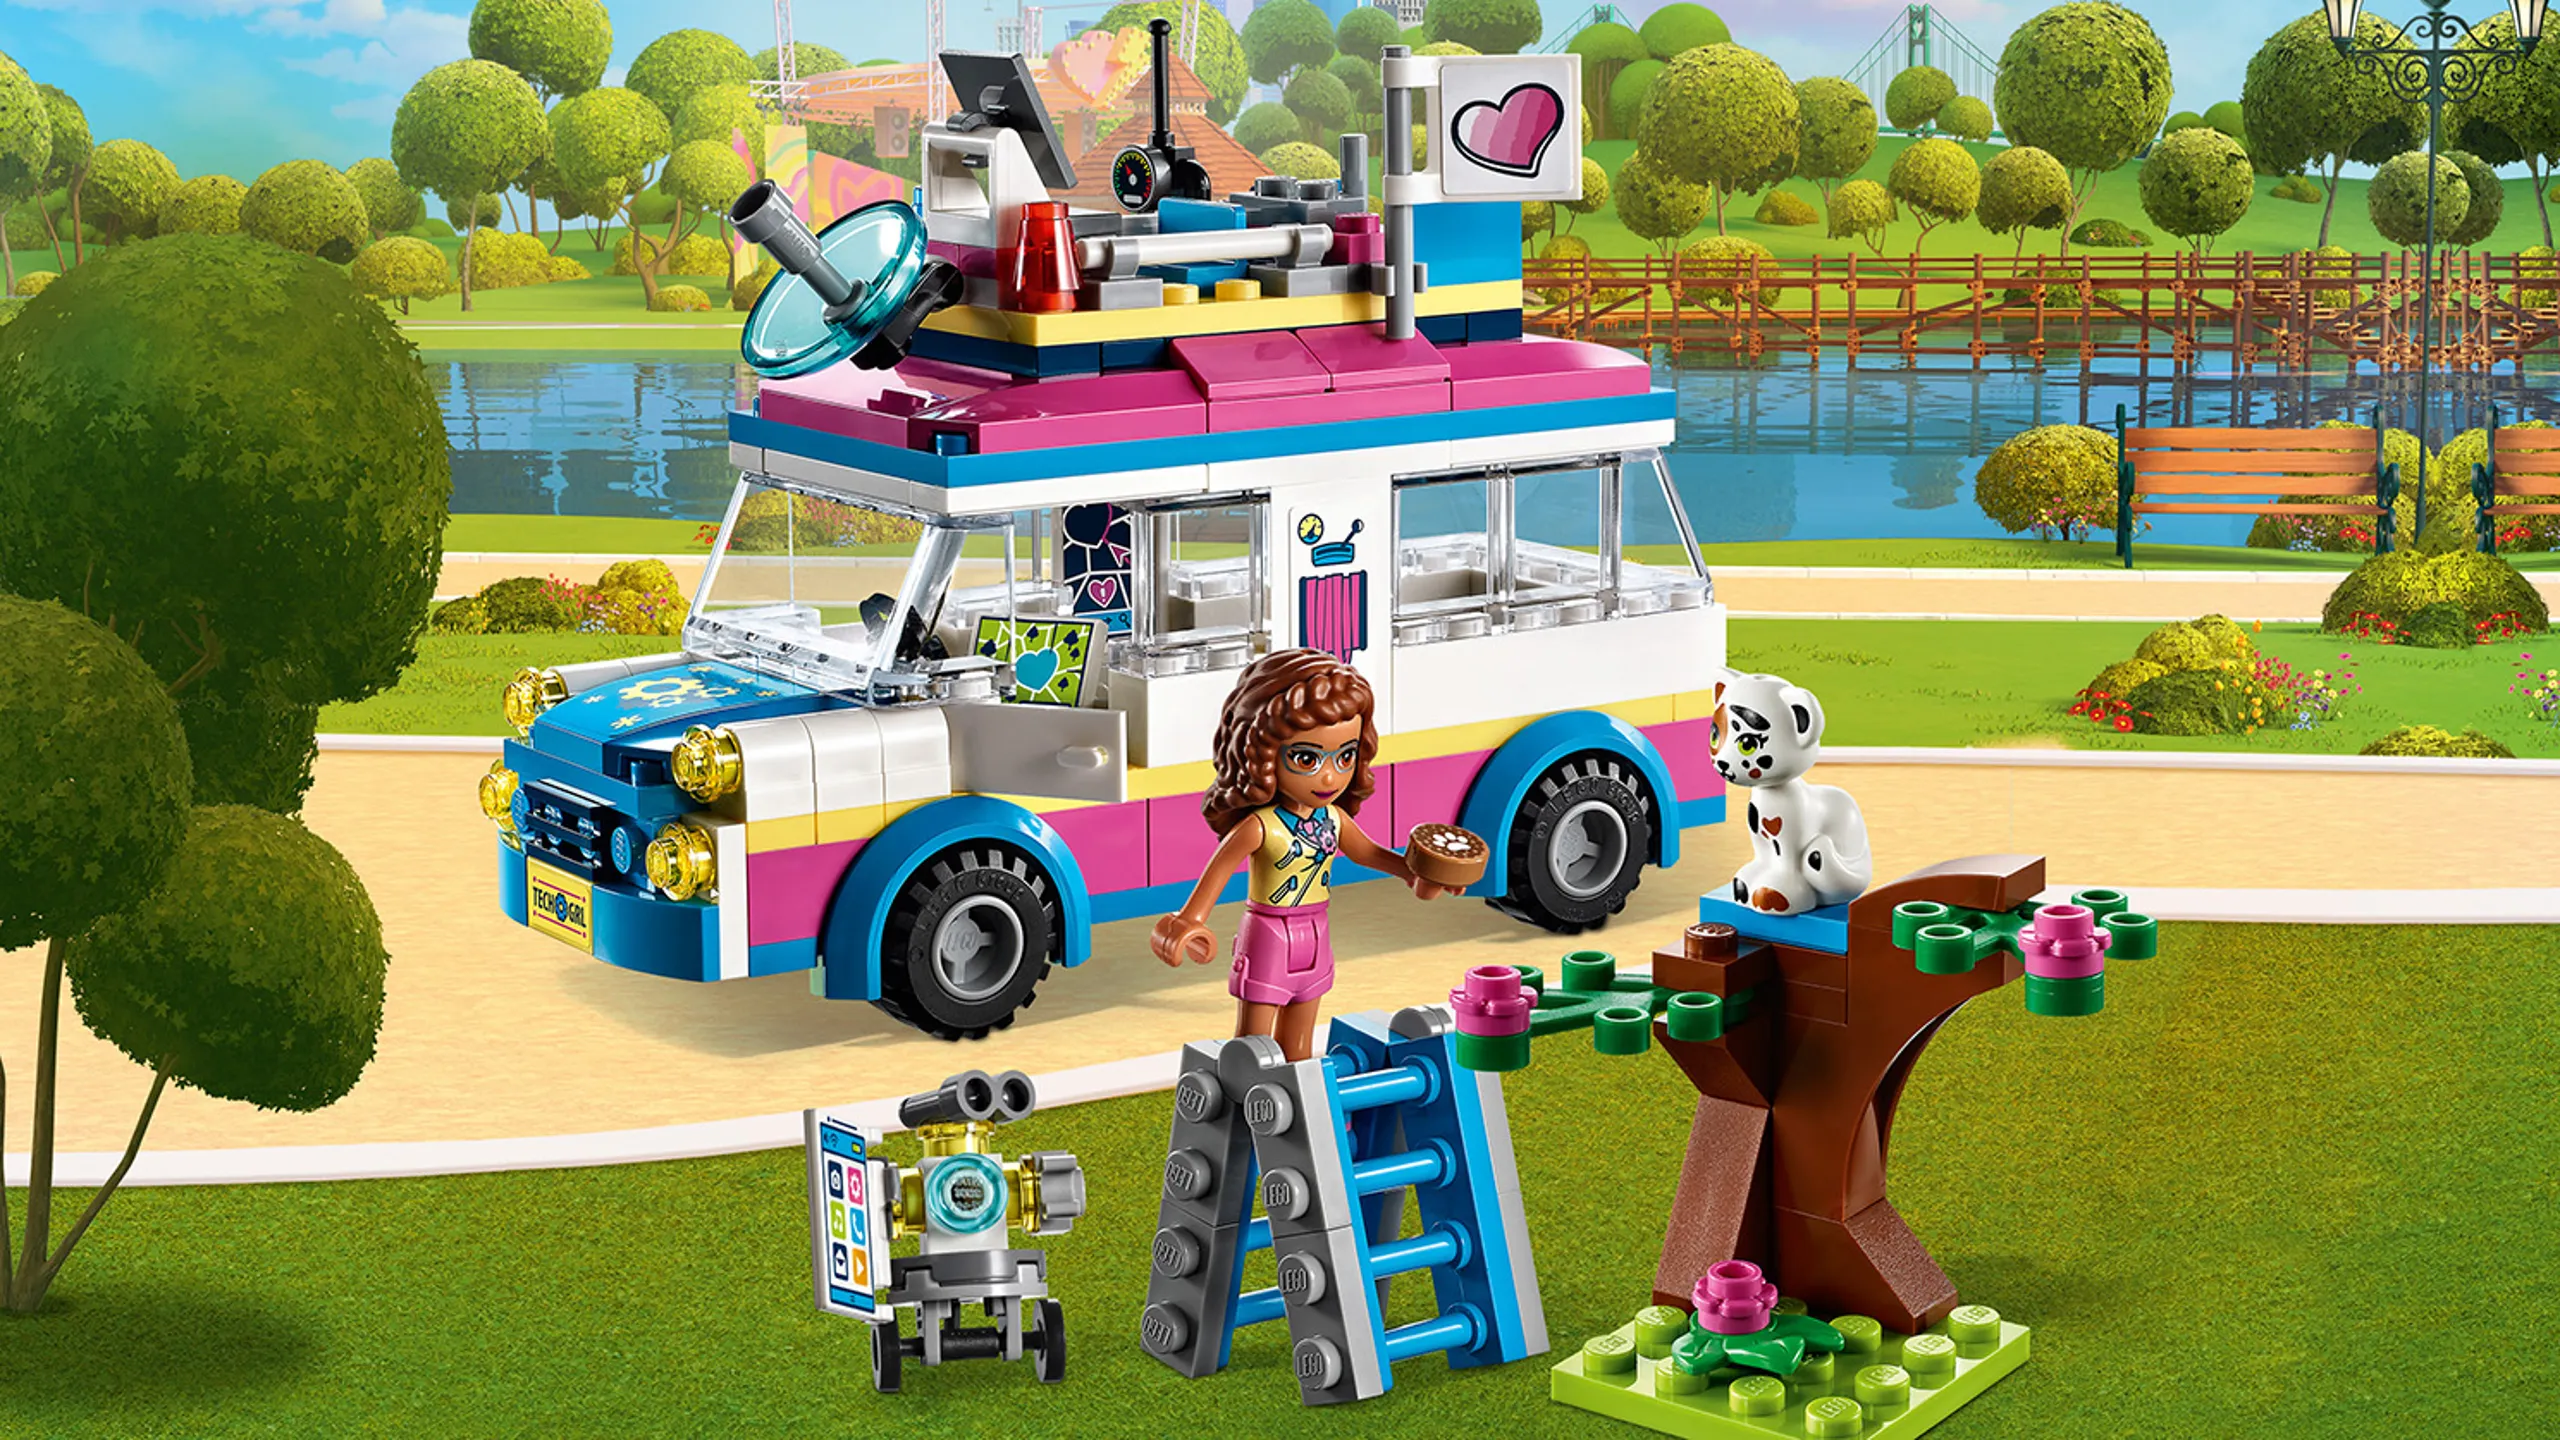 LEGO Friends Olivia's Mission Vehicle - 41333 - Head to Heartlake City Park in Olivia’s Mission Vehicle. There’s a cat who needs her help! Olivia and her robot Zobo to the rescue. Put Zobo in his rooftop control centre to monitor the situation, while Olivia sets up the ladder.